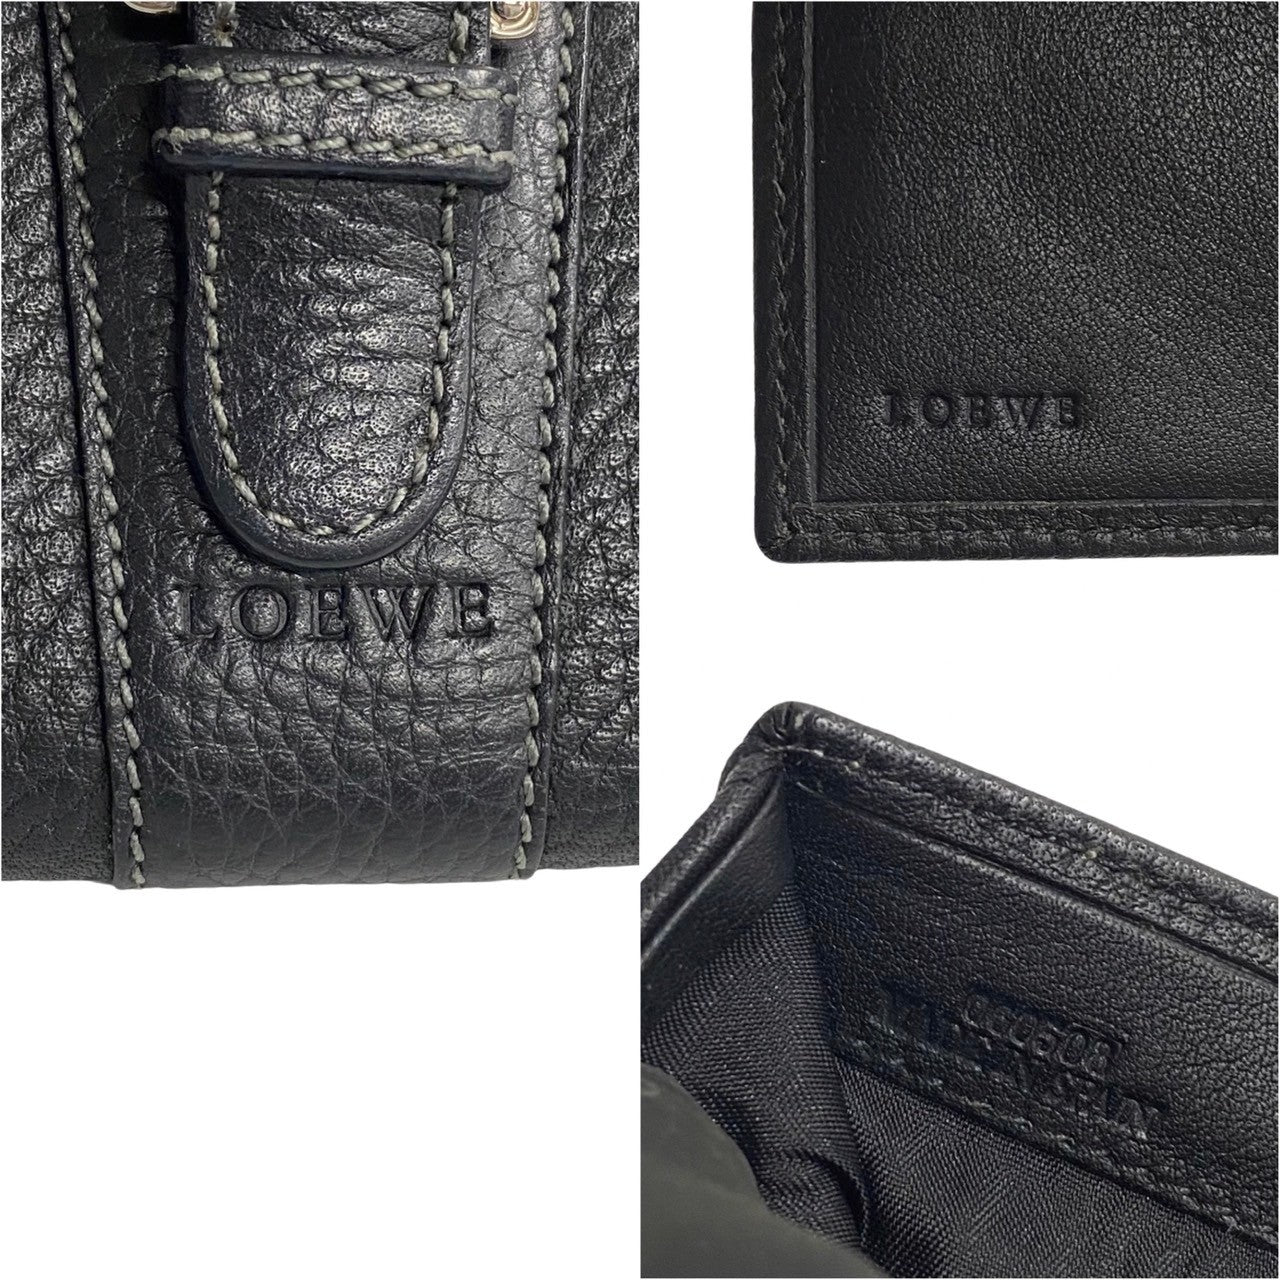 Loewe Leather Bifold Compact Wallet Leather Short Wallet in Good condition